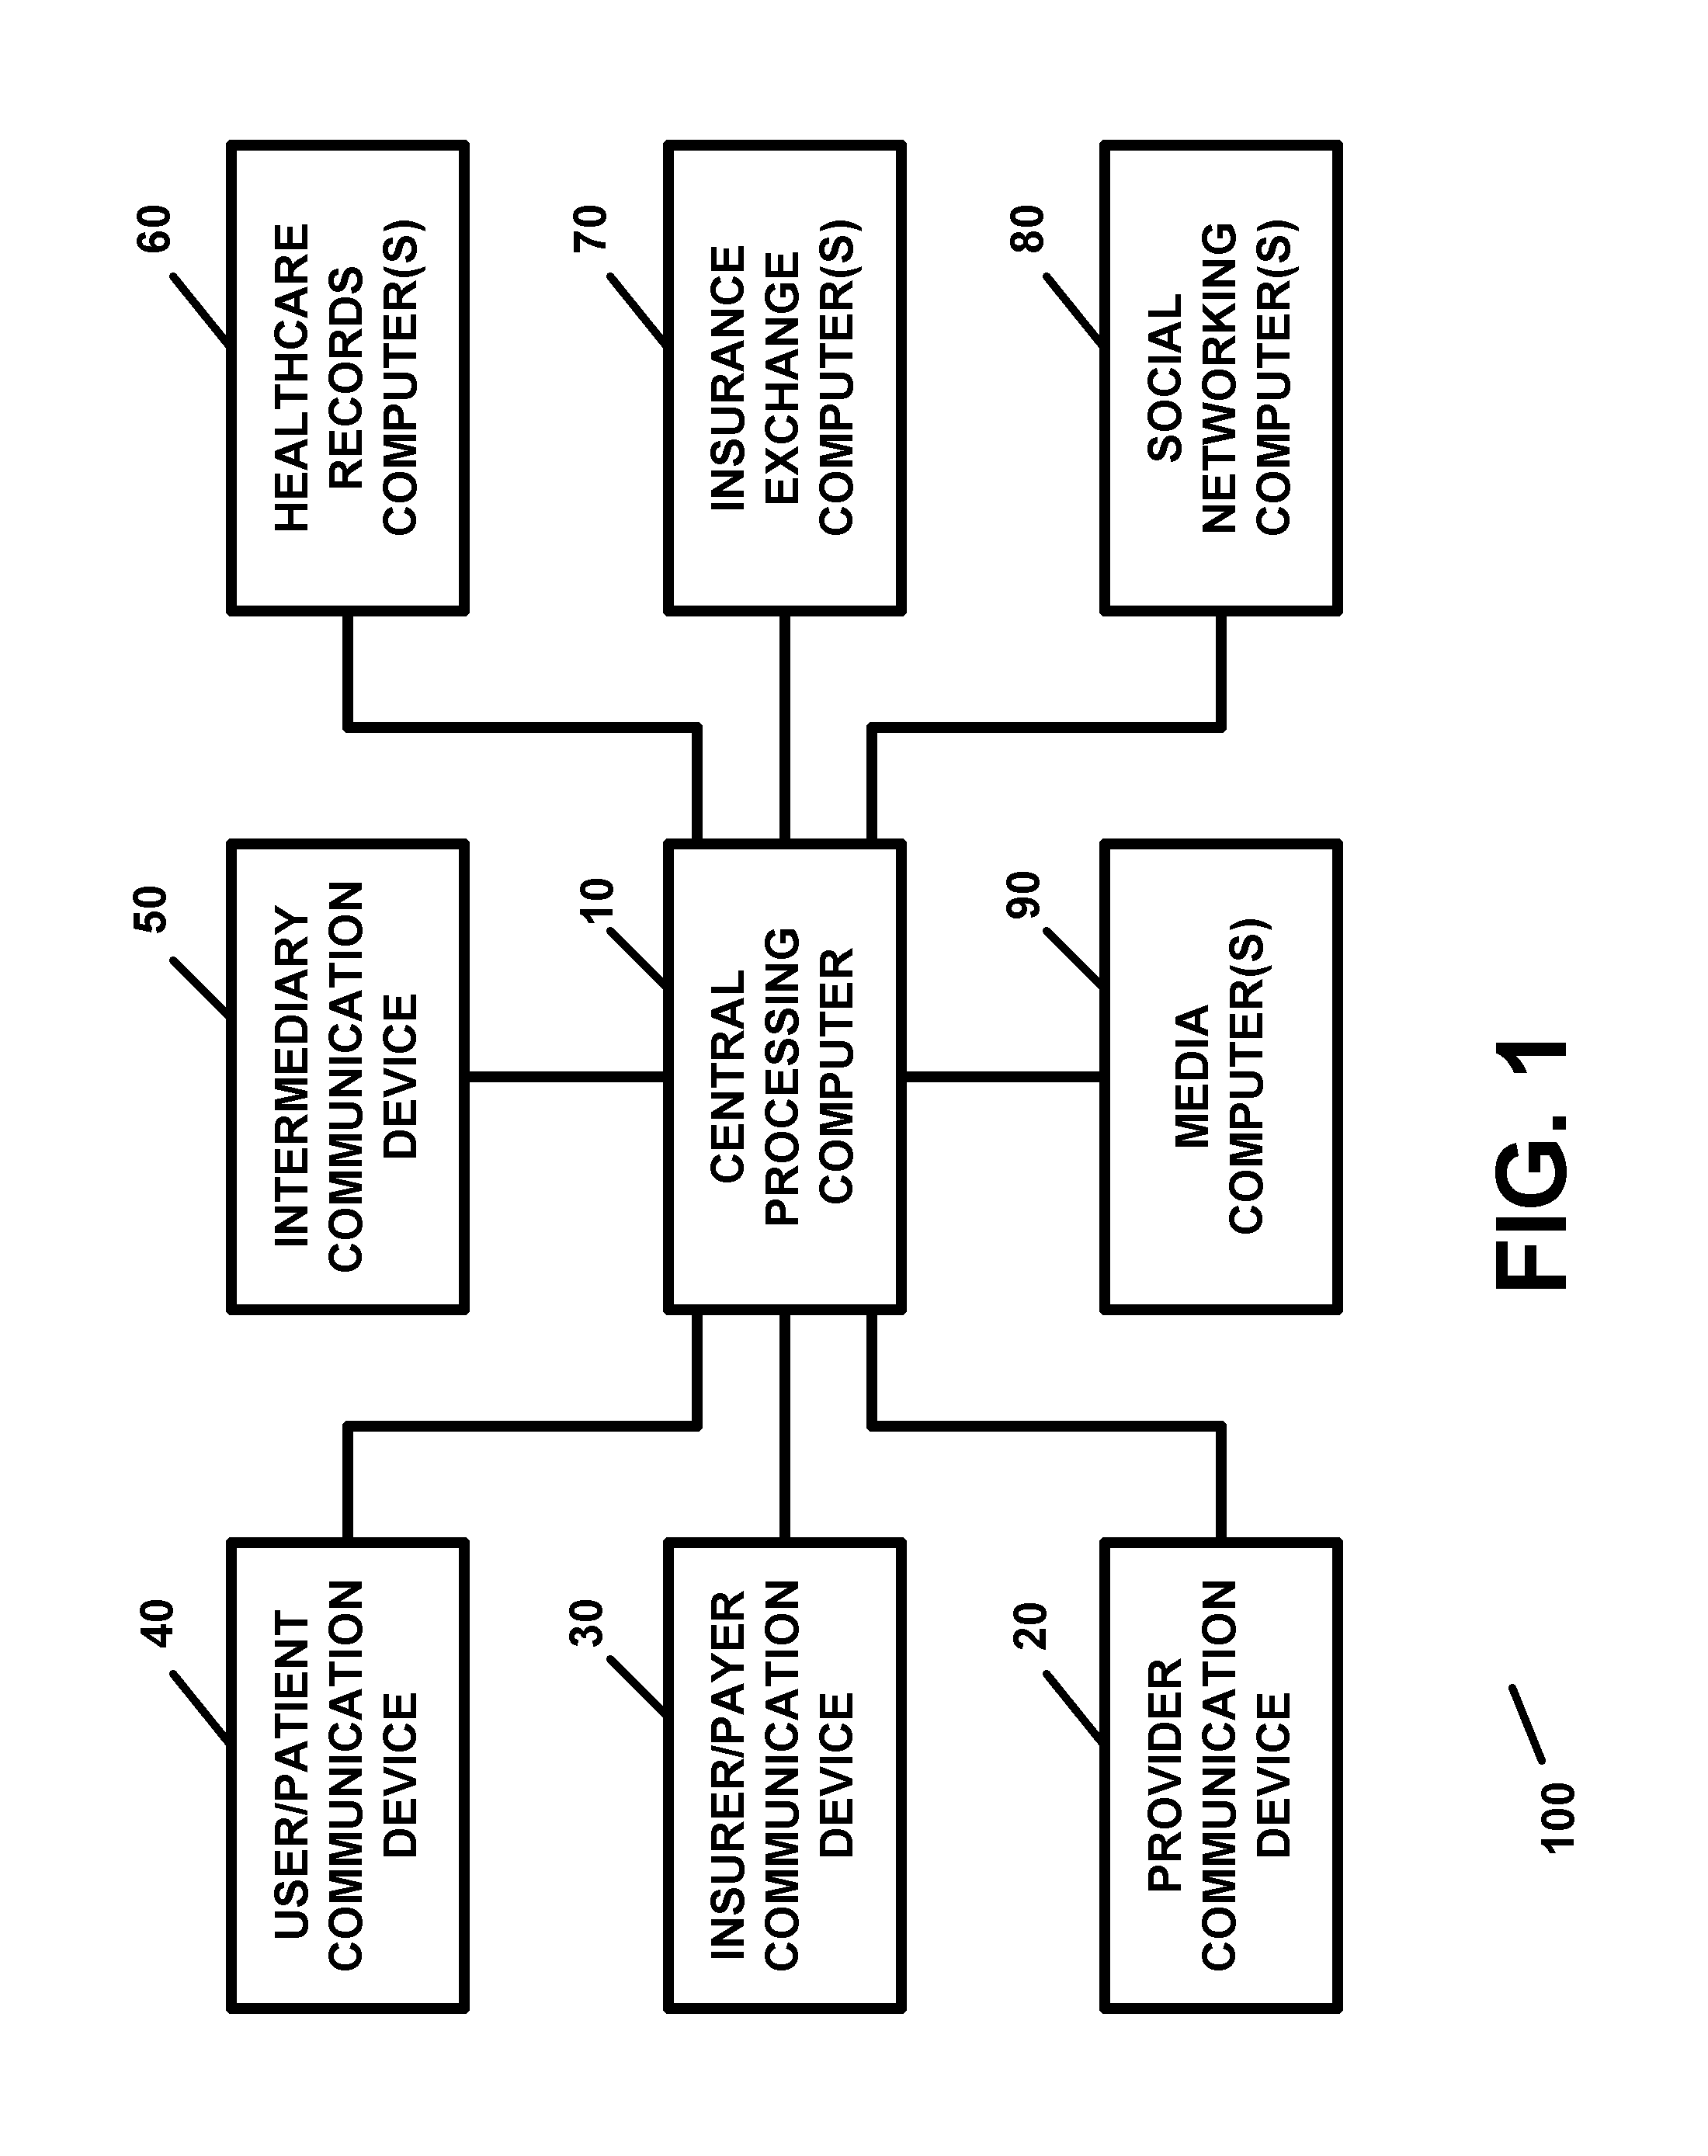 Apparatus and method for processing and/or providing healthcare information and/or healthcare-related information with or using an electronic healthcare record or electronic healthcare records